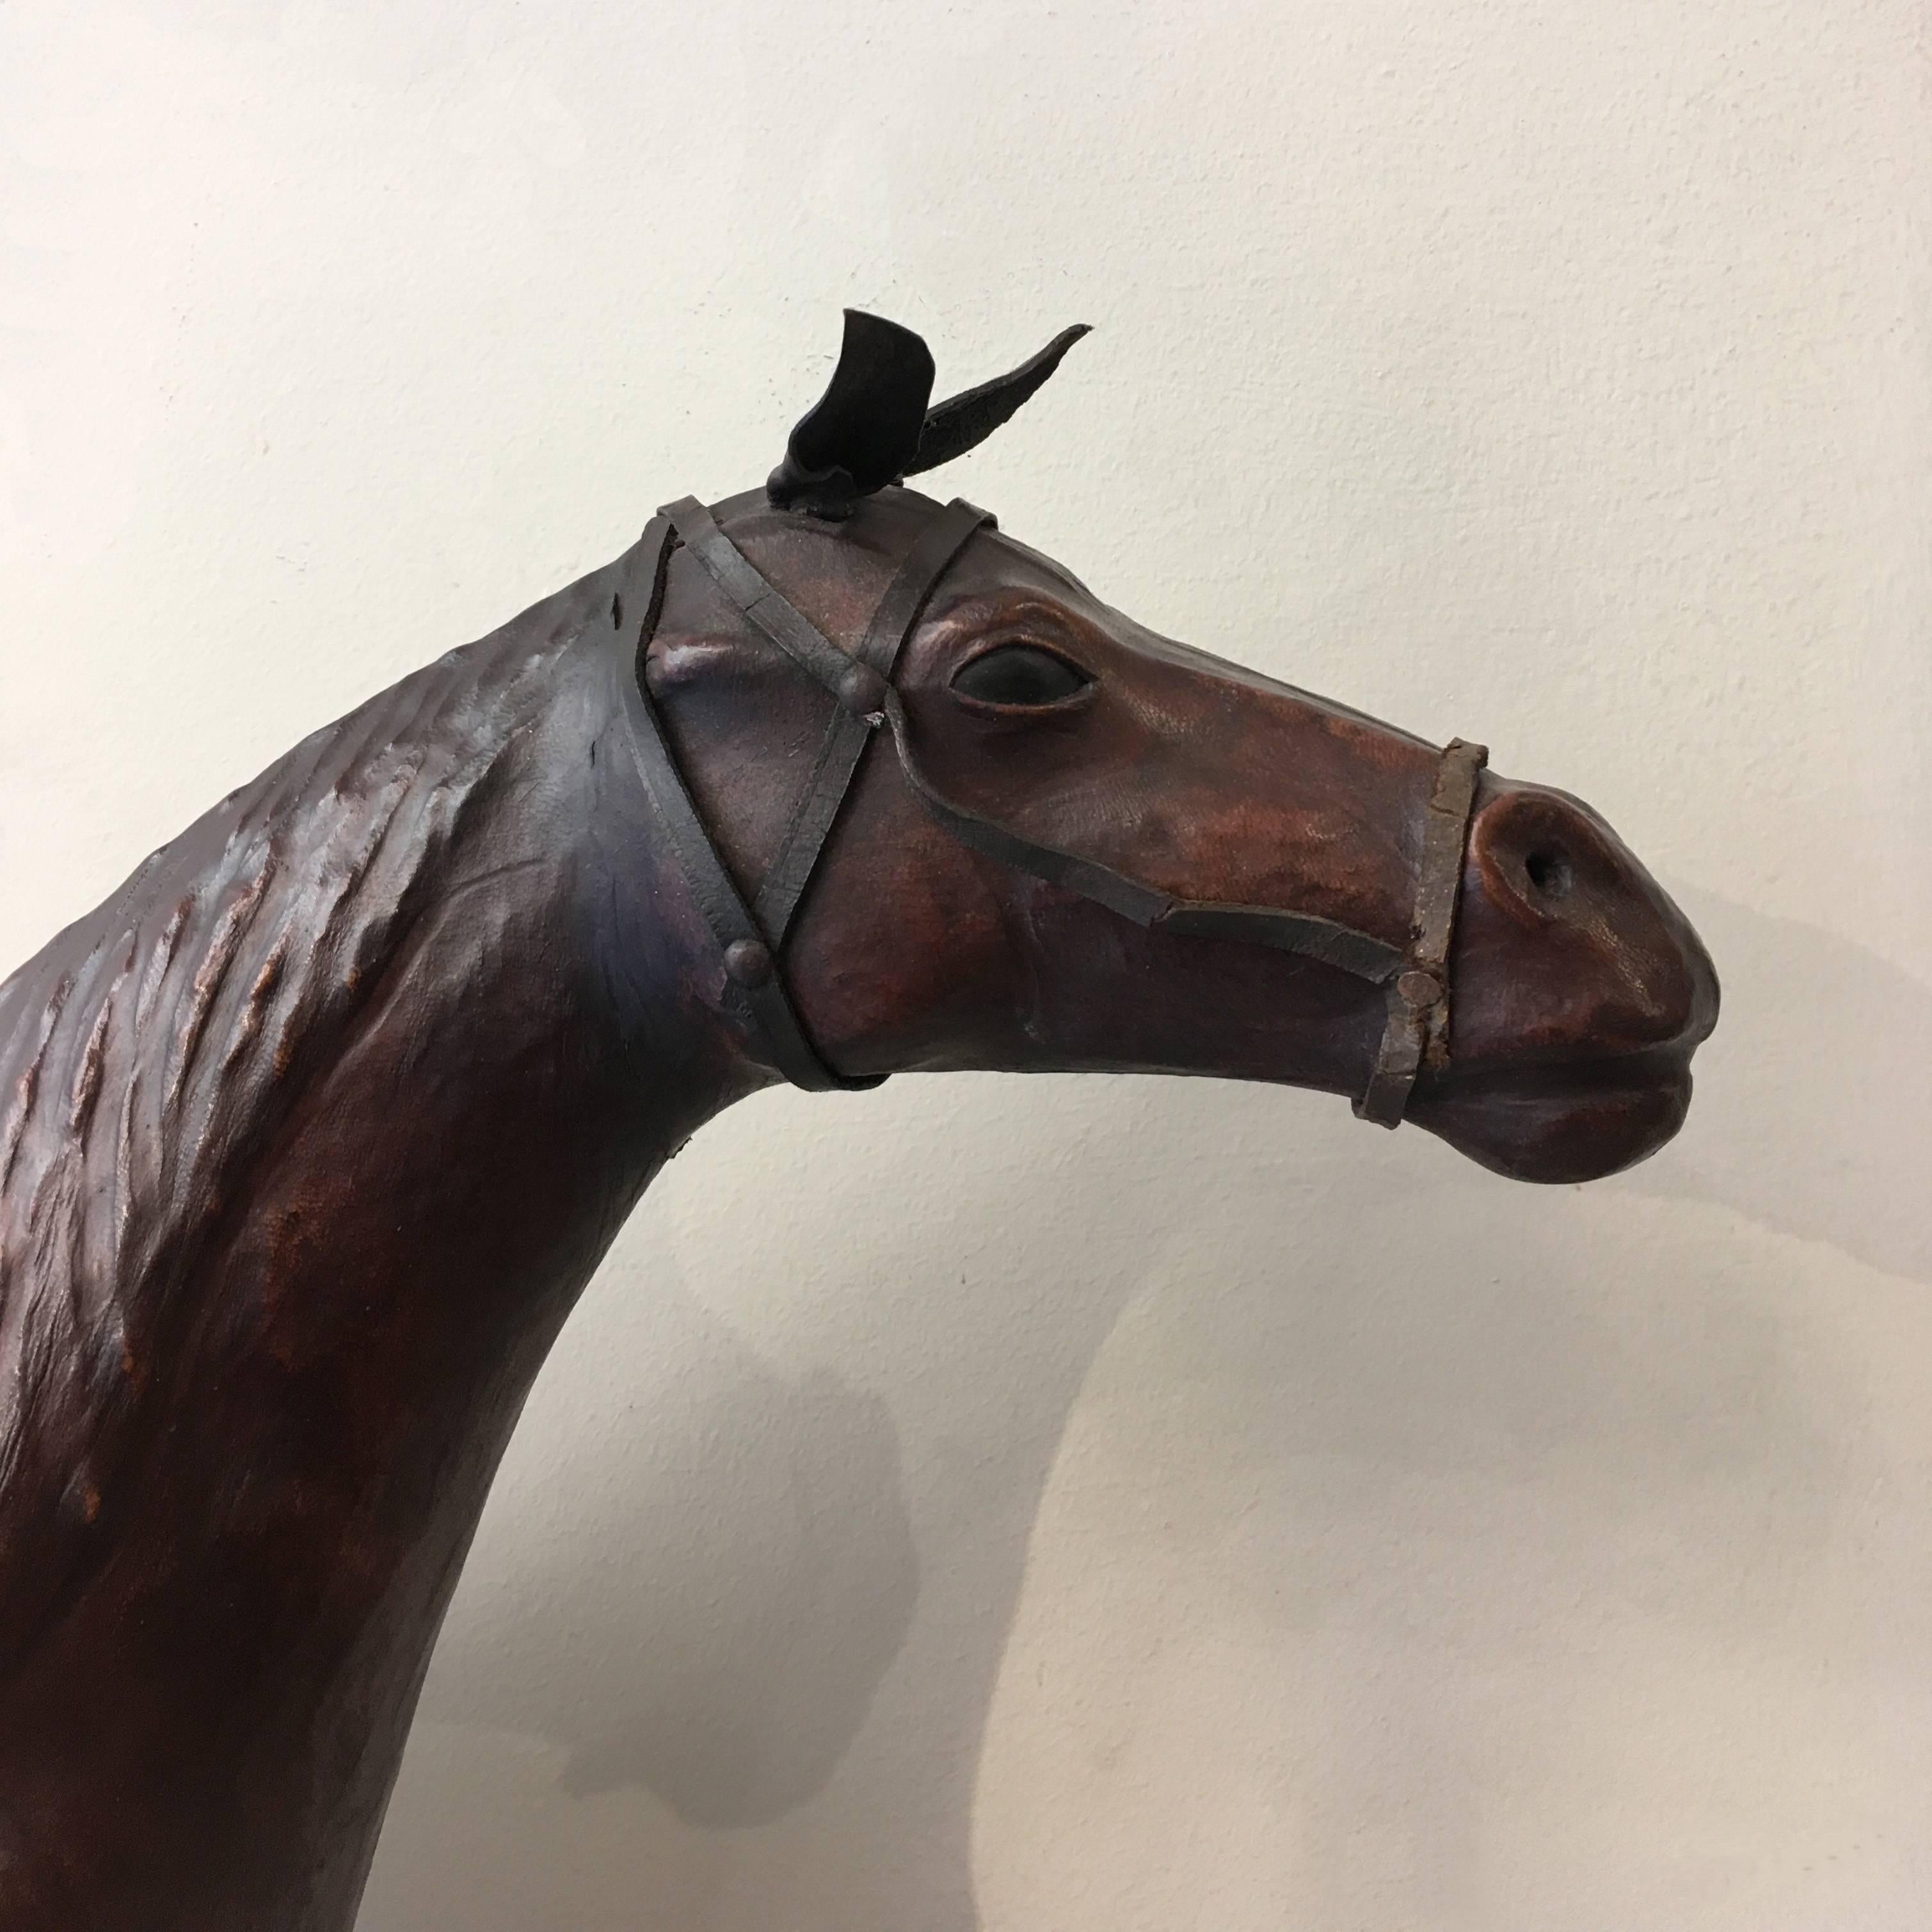 Late 19th Century French Handmade Leather Full Body Horse Sculpture or Model 5